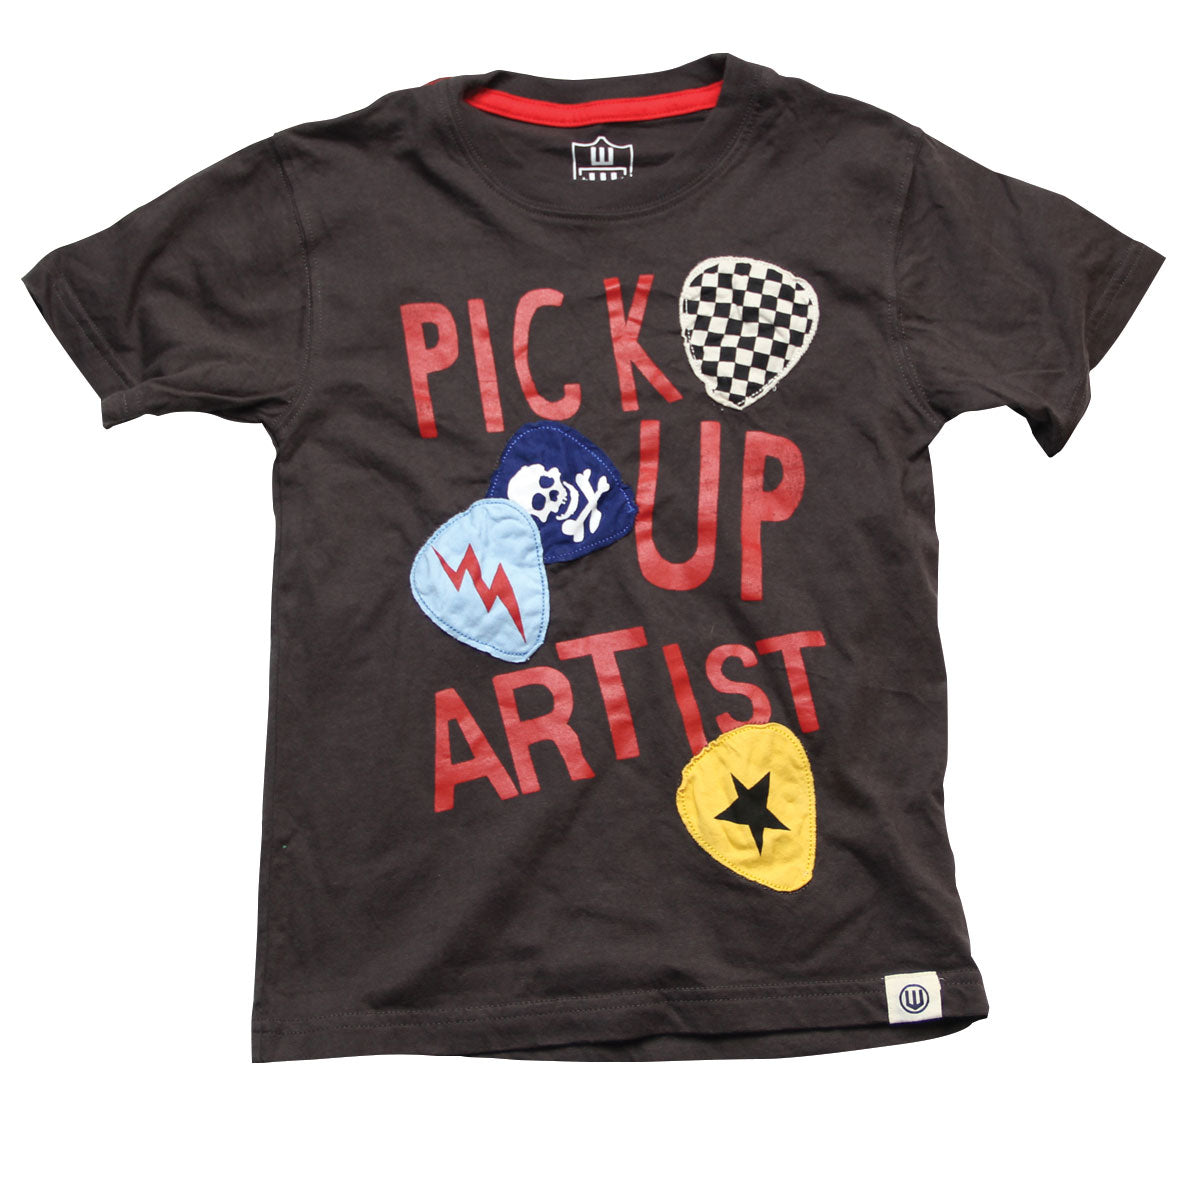 Boys' Pick Up Artist Shirt by Wes and Willy